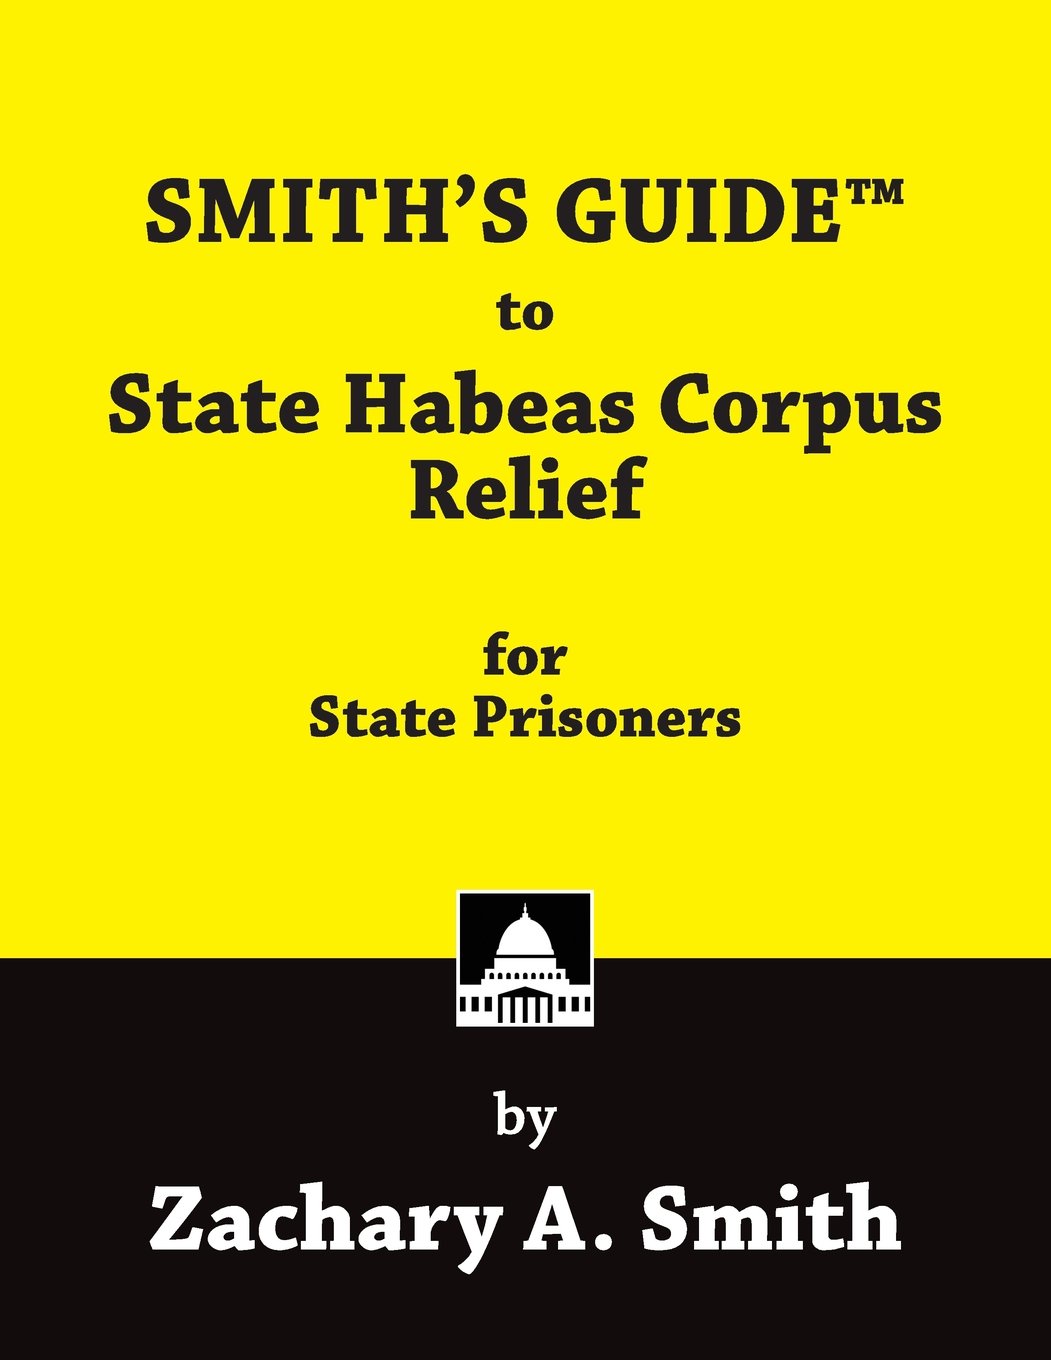 Smith's Guide to State Habeas Corpus Relief for State Prisoners - SureShot Books Publishing LLC